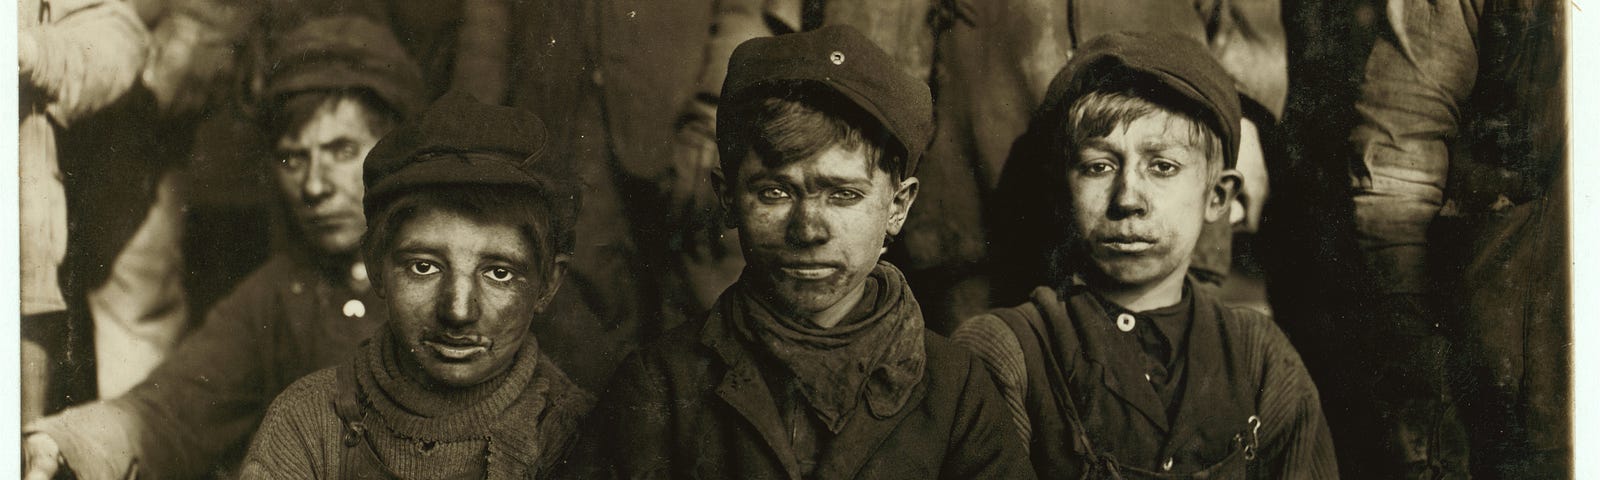 Lewis Hine b/w Library of Congress photo from 1911 showing child laborers, several young, seated  ‘breaker boys.’ The photo depicts small boys, 8–10 years old, in dirty clothing, faces sneared with coal dust, working in an anthracite coal mine in eastern Pennsylvania.